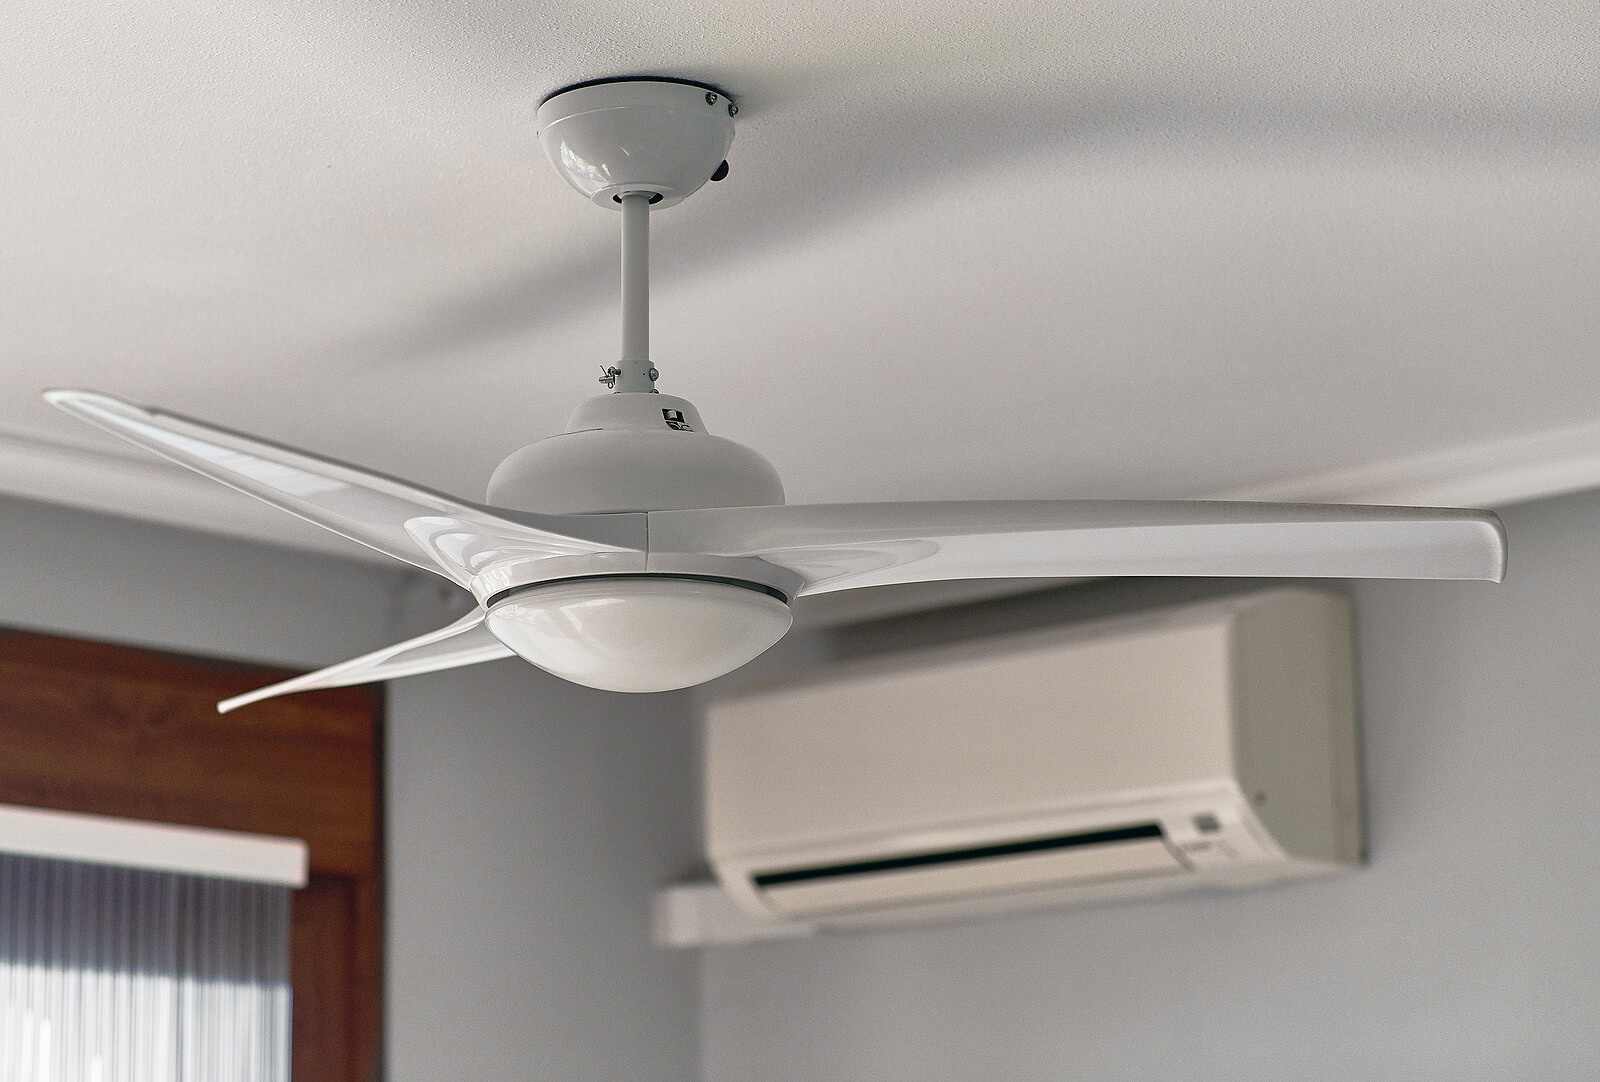 Should There Be a Ceiling Fan in Every Room?